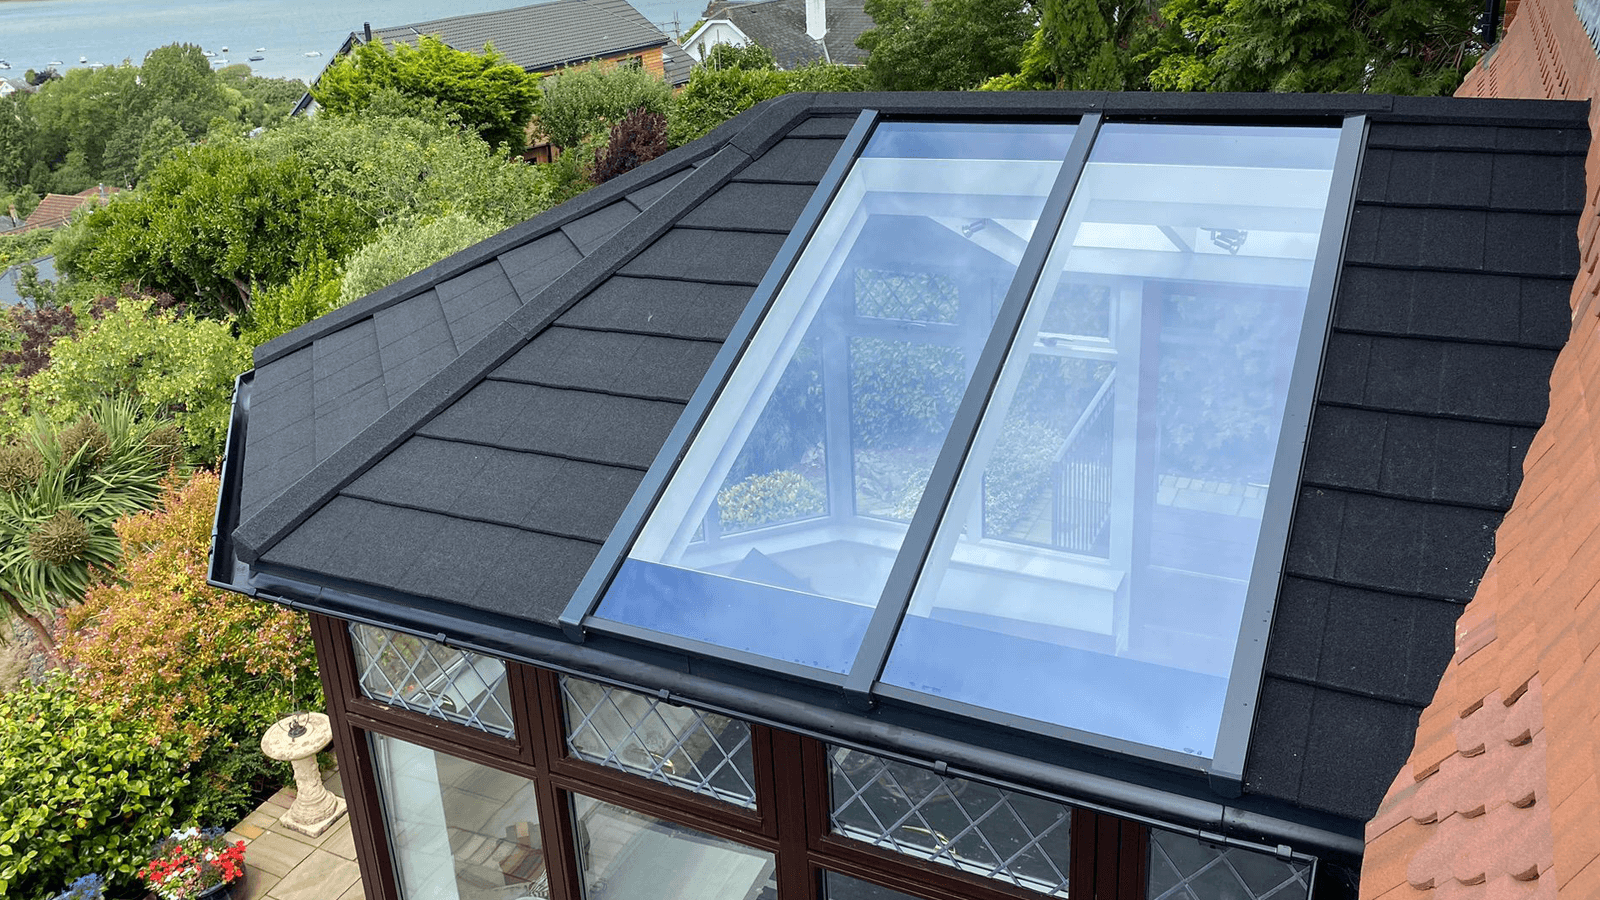 tiled roof of a conservatory with a rooflight